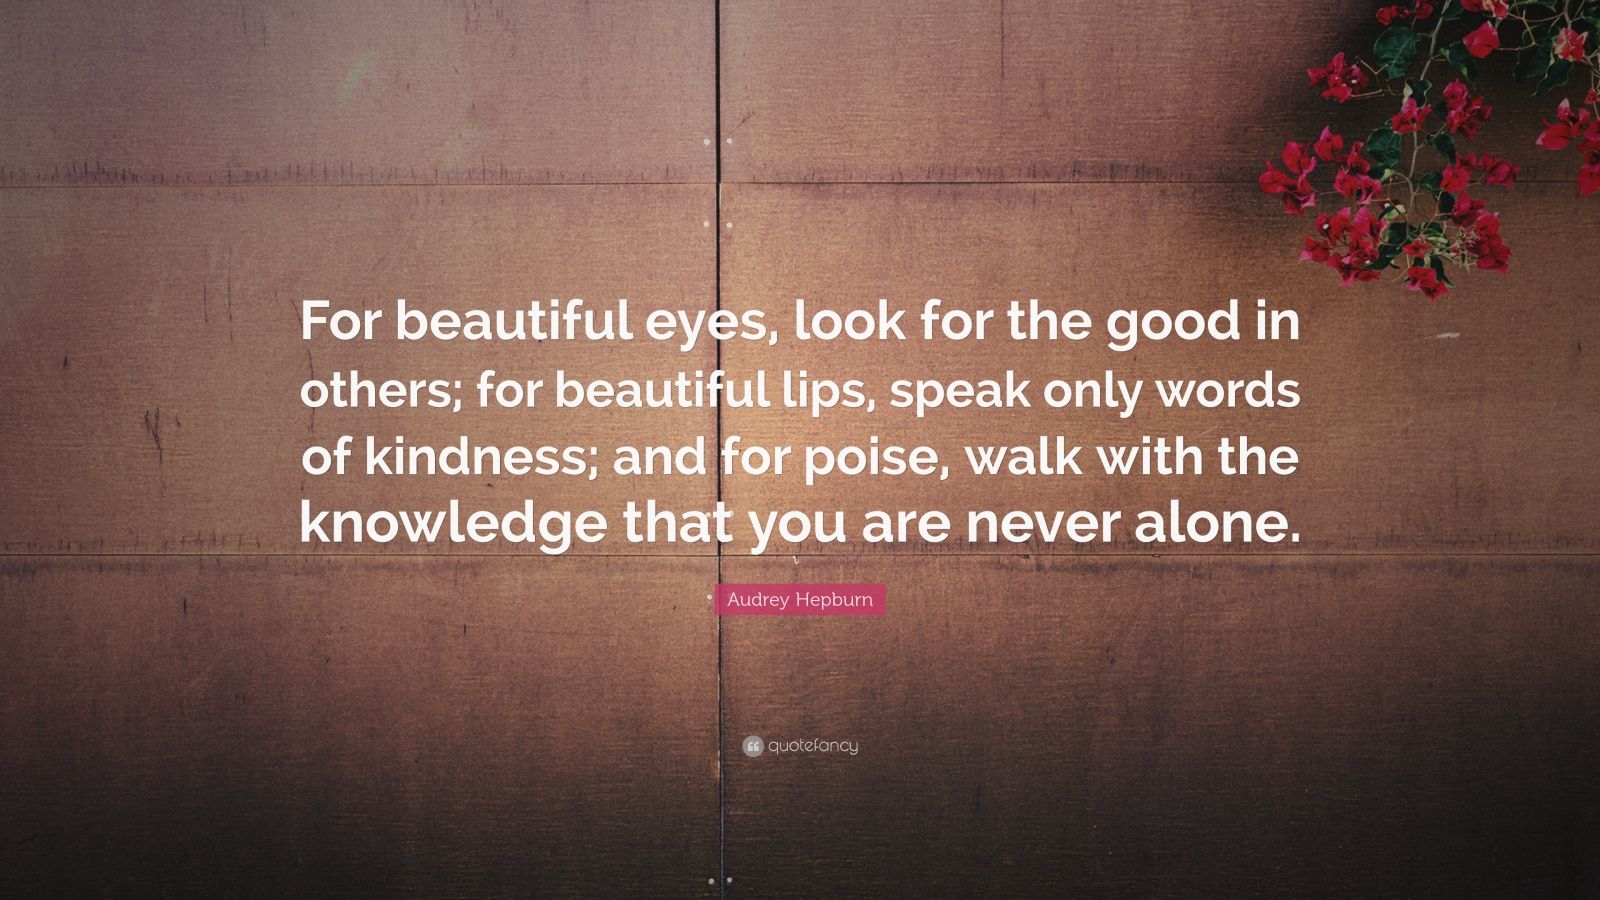 Audrey Hepburn Quote: “For beautiful eyes, look for the good in others